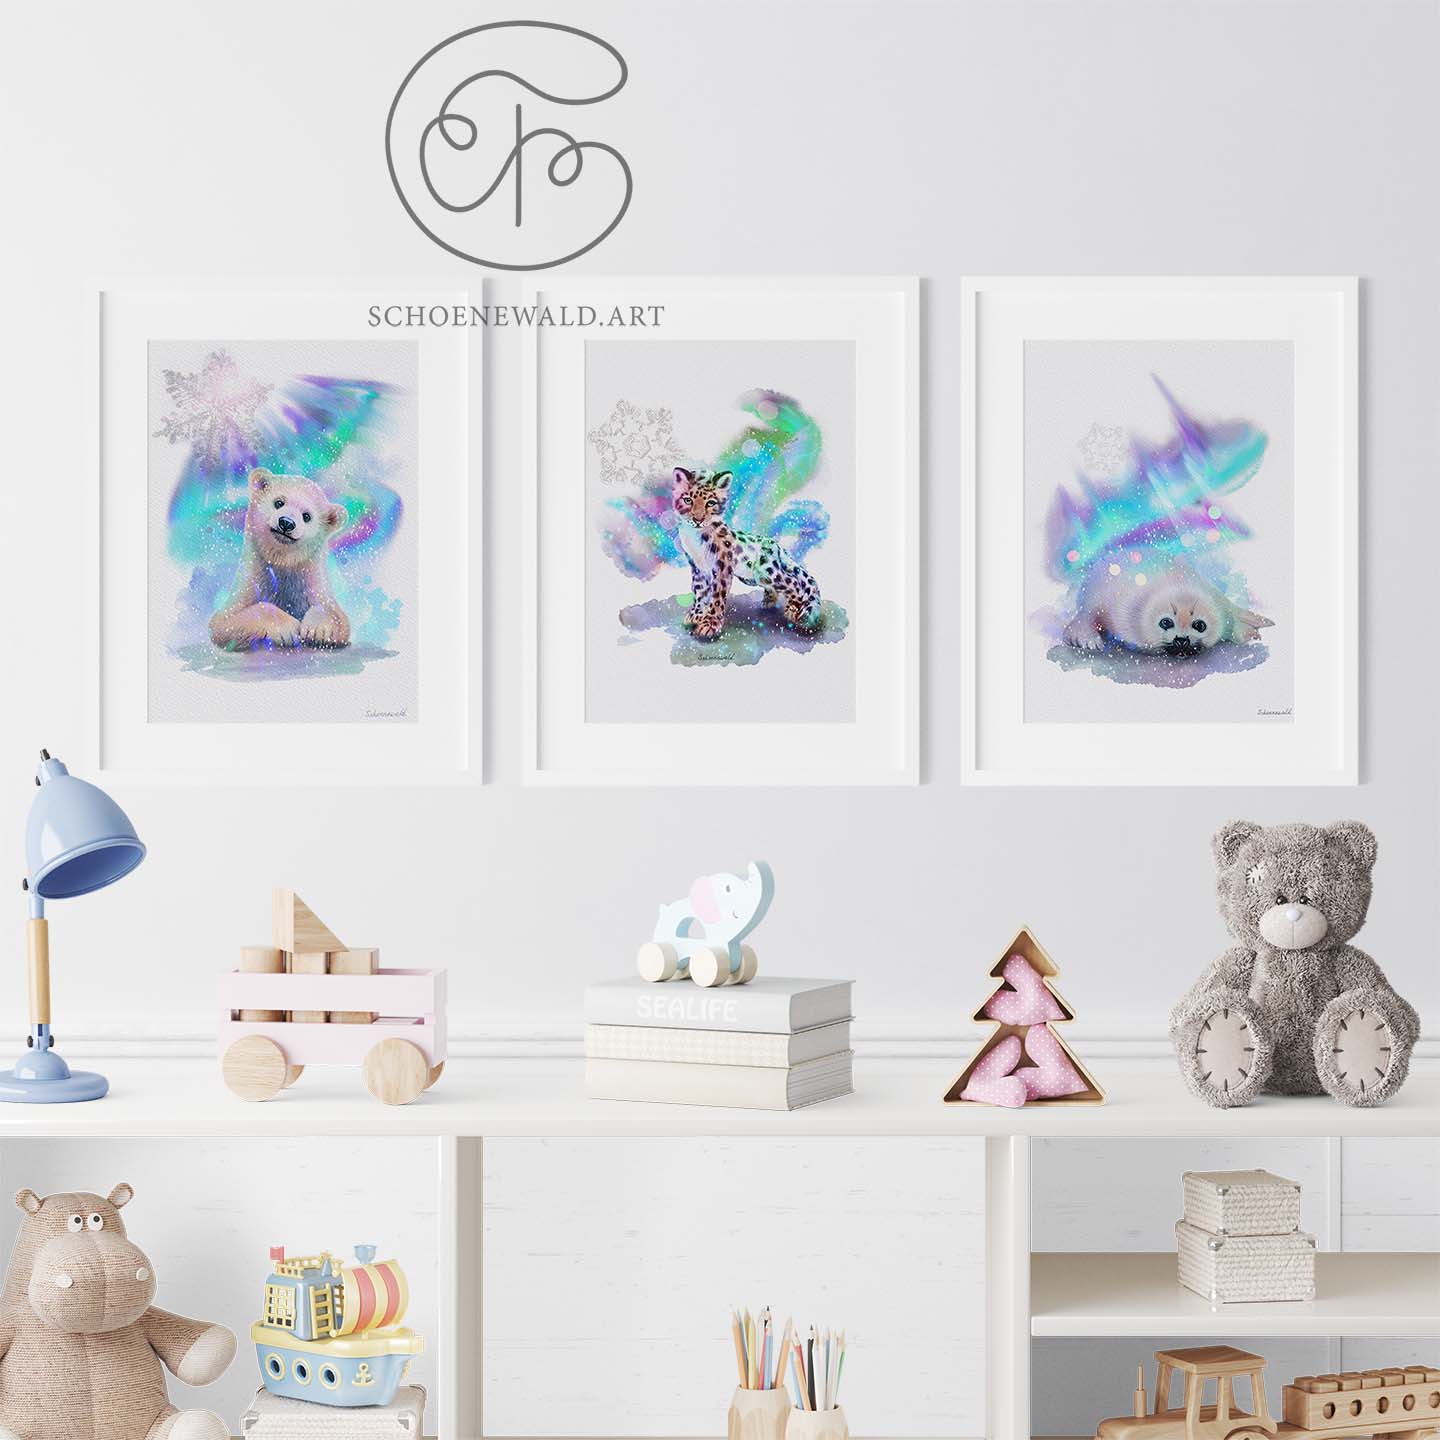 Watercolor fine art prints of adorable animals in northern lights by Schoenewald.art in a nursery interior